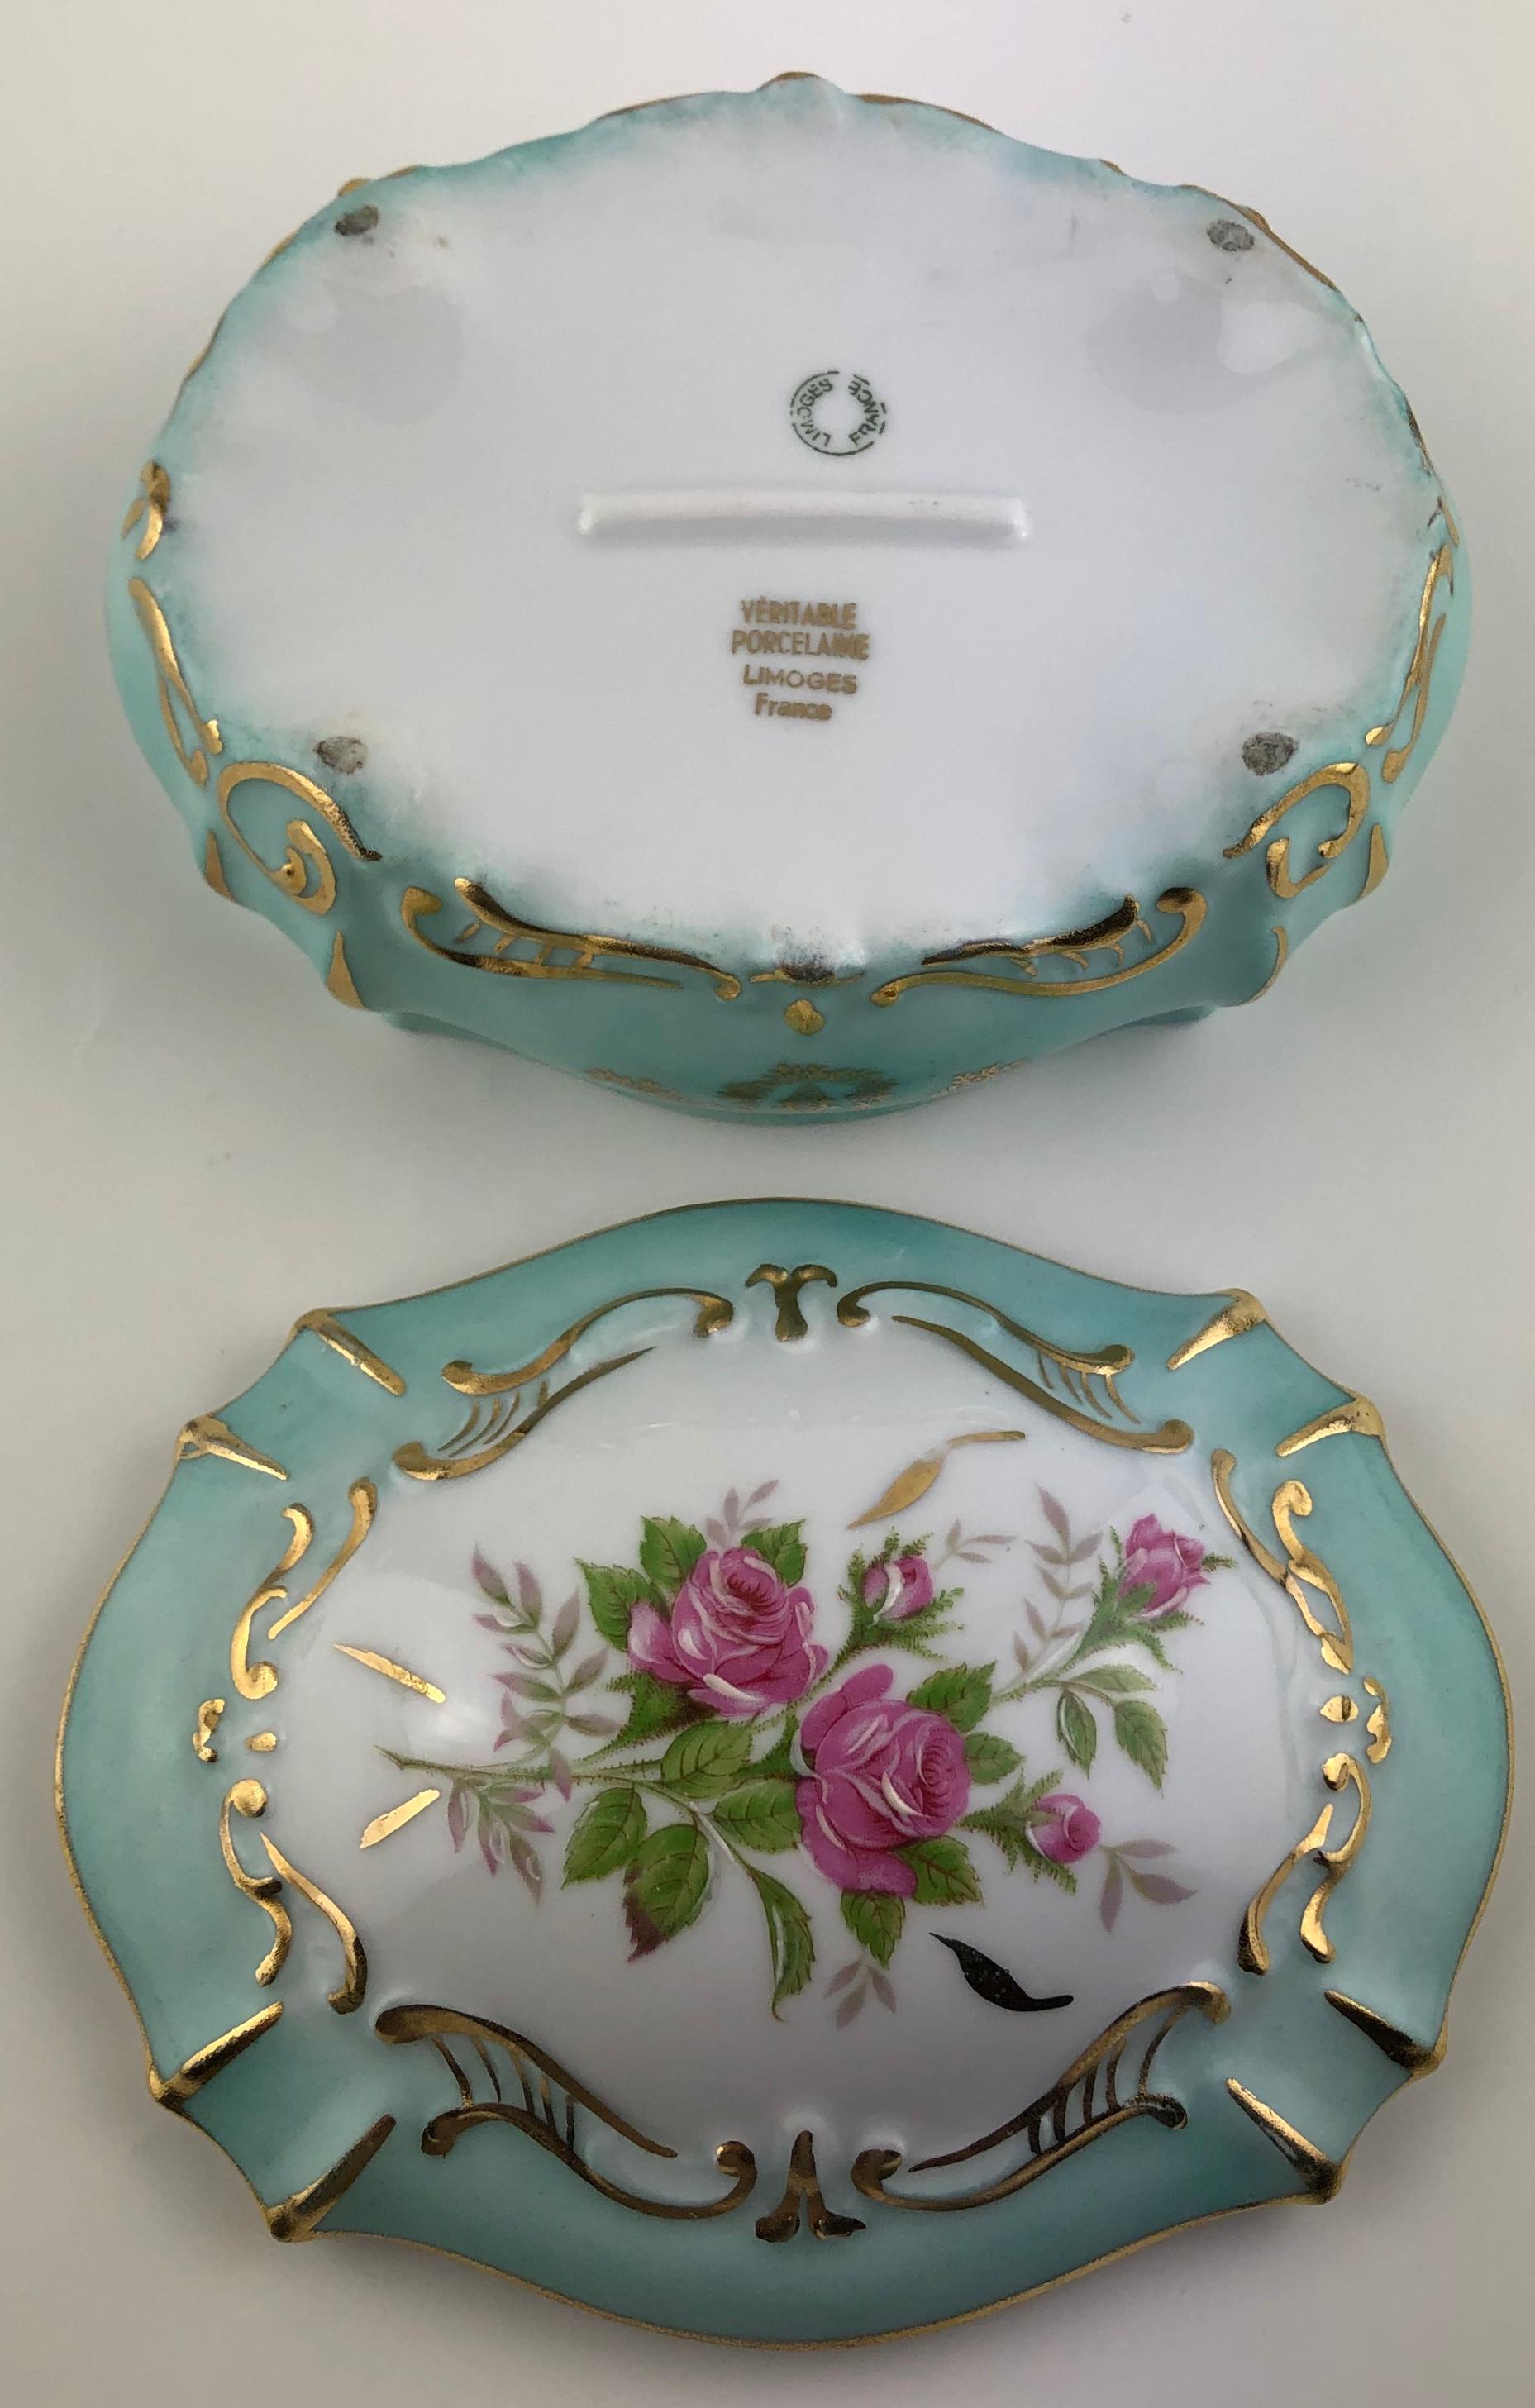 Gilt Exquisite French Limoges Hand Painted Gold Trim Trinket or Jewelry Box